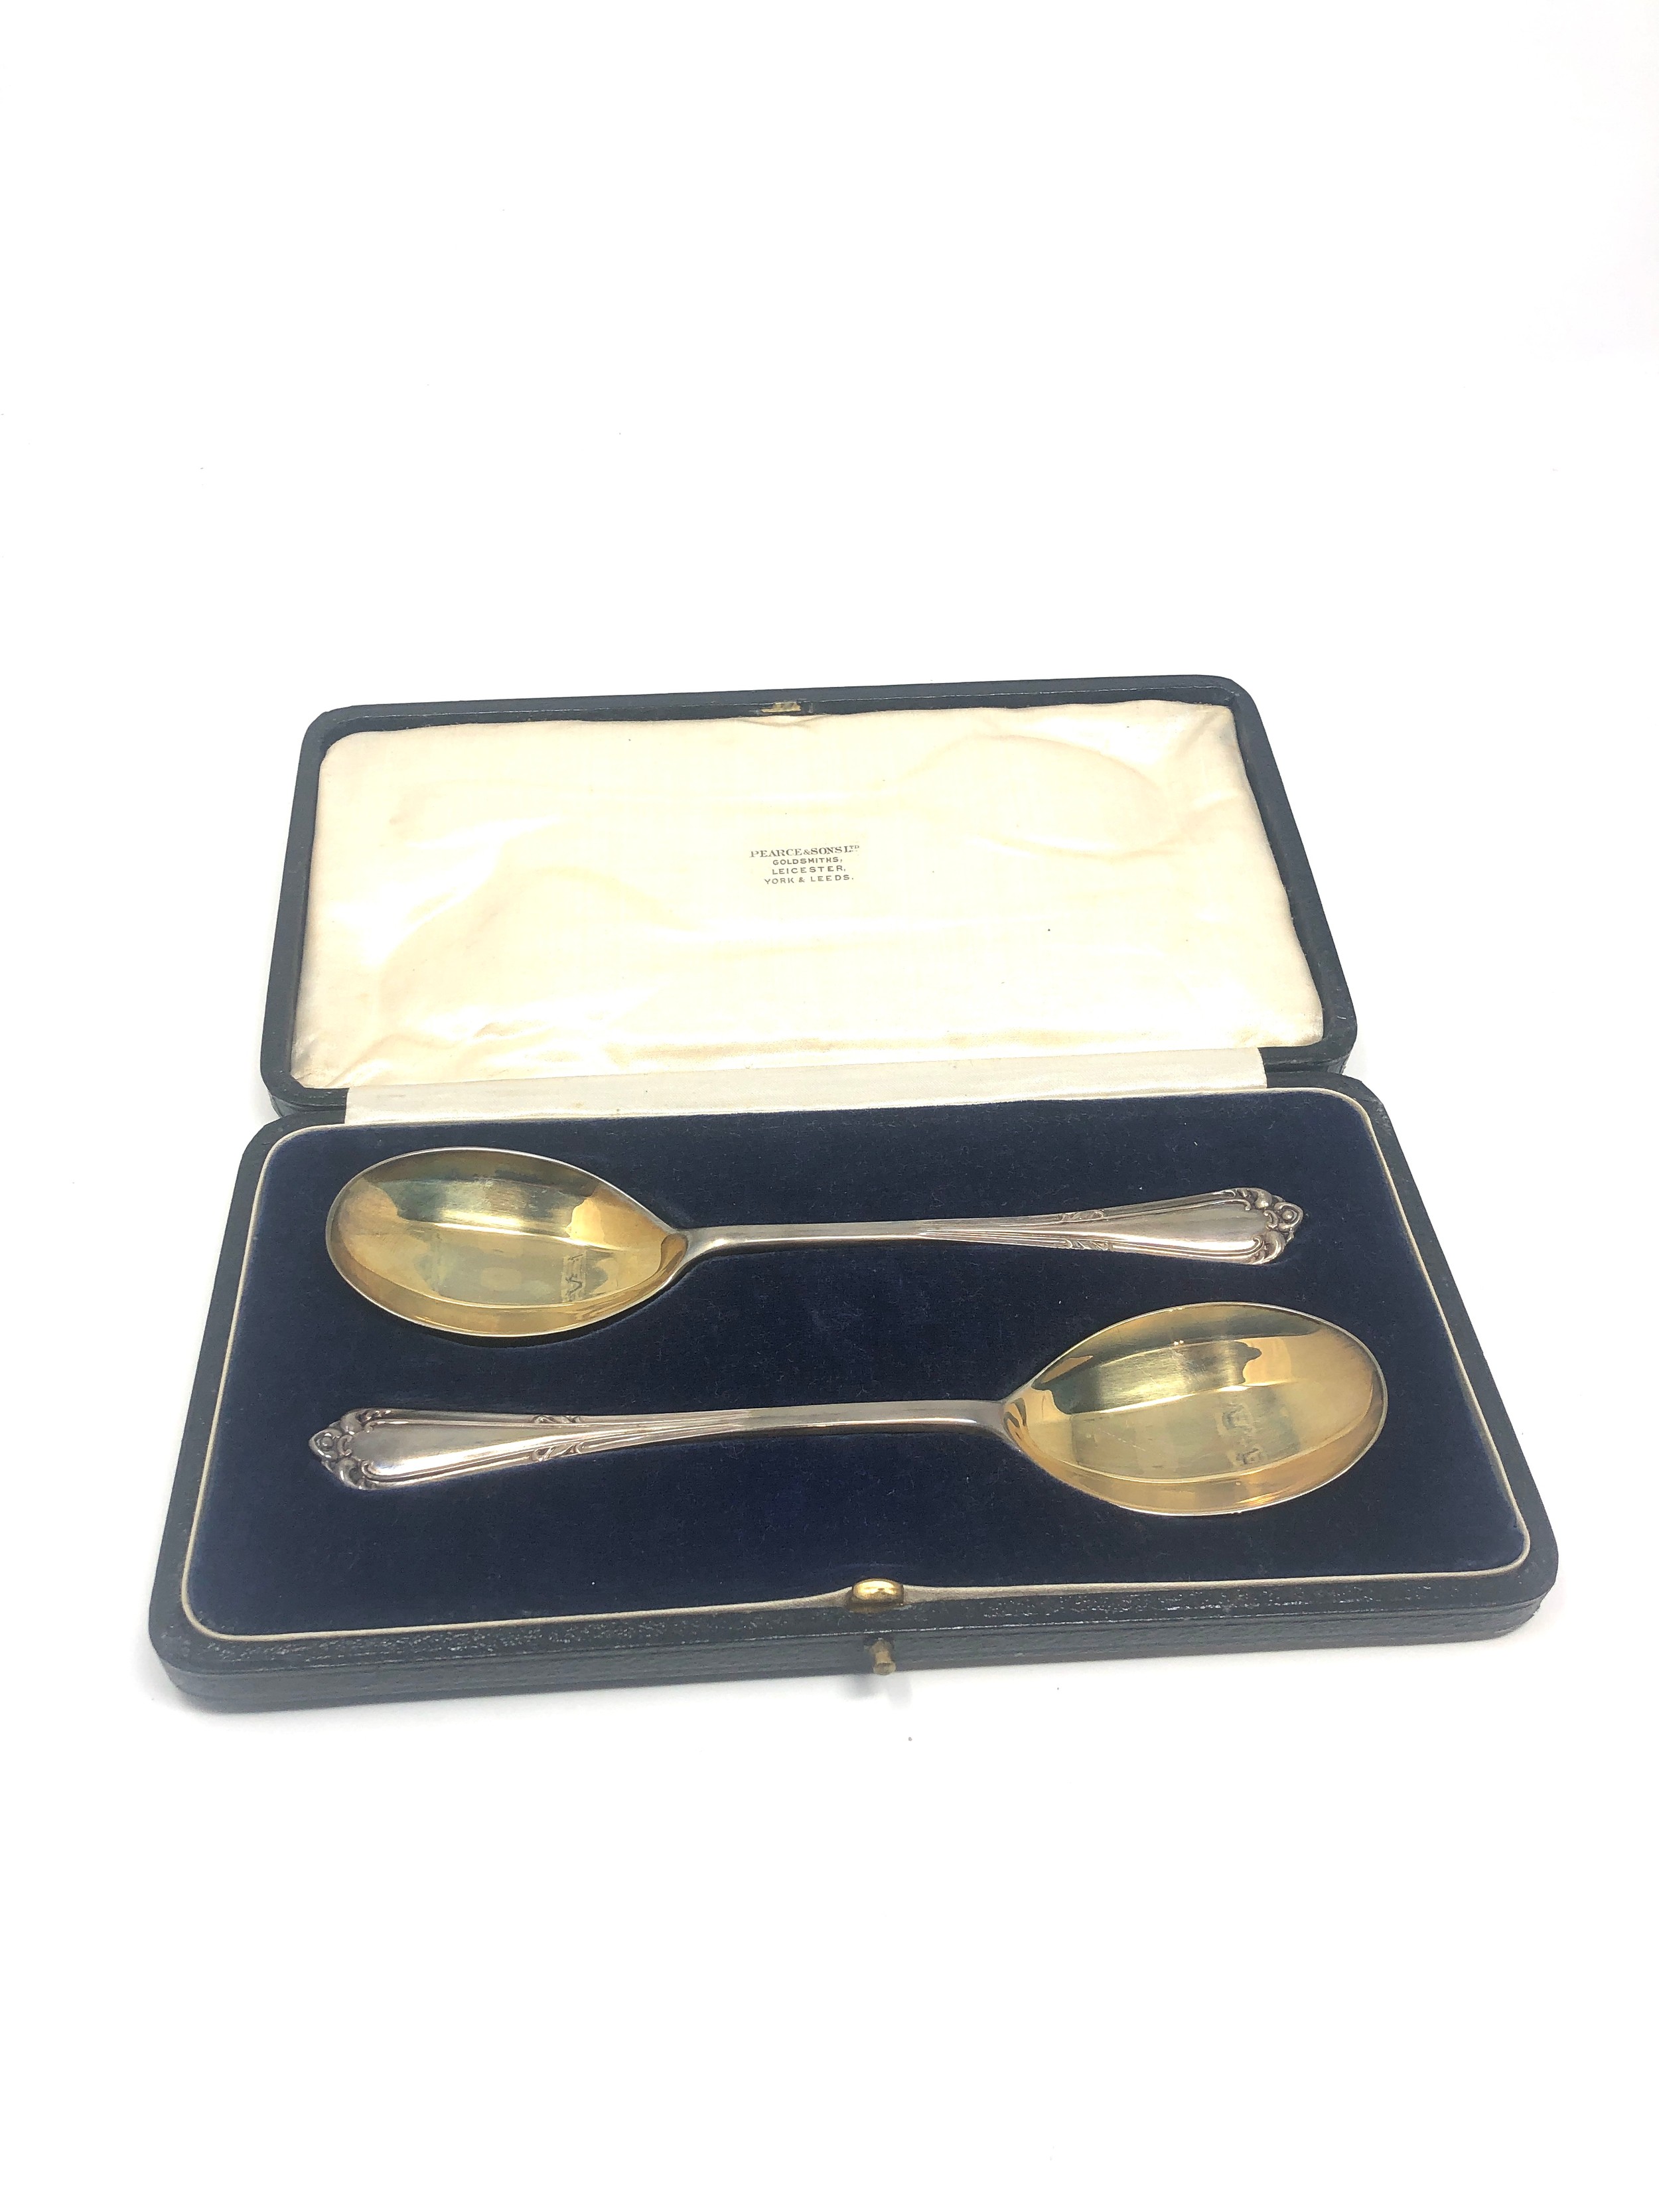 Pair of boxed pearce & sons serving spoons London silver hallmarks silver weight 95g